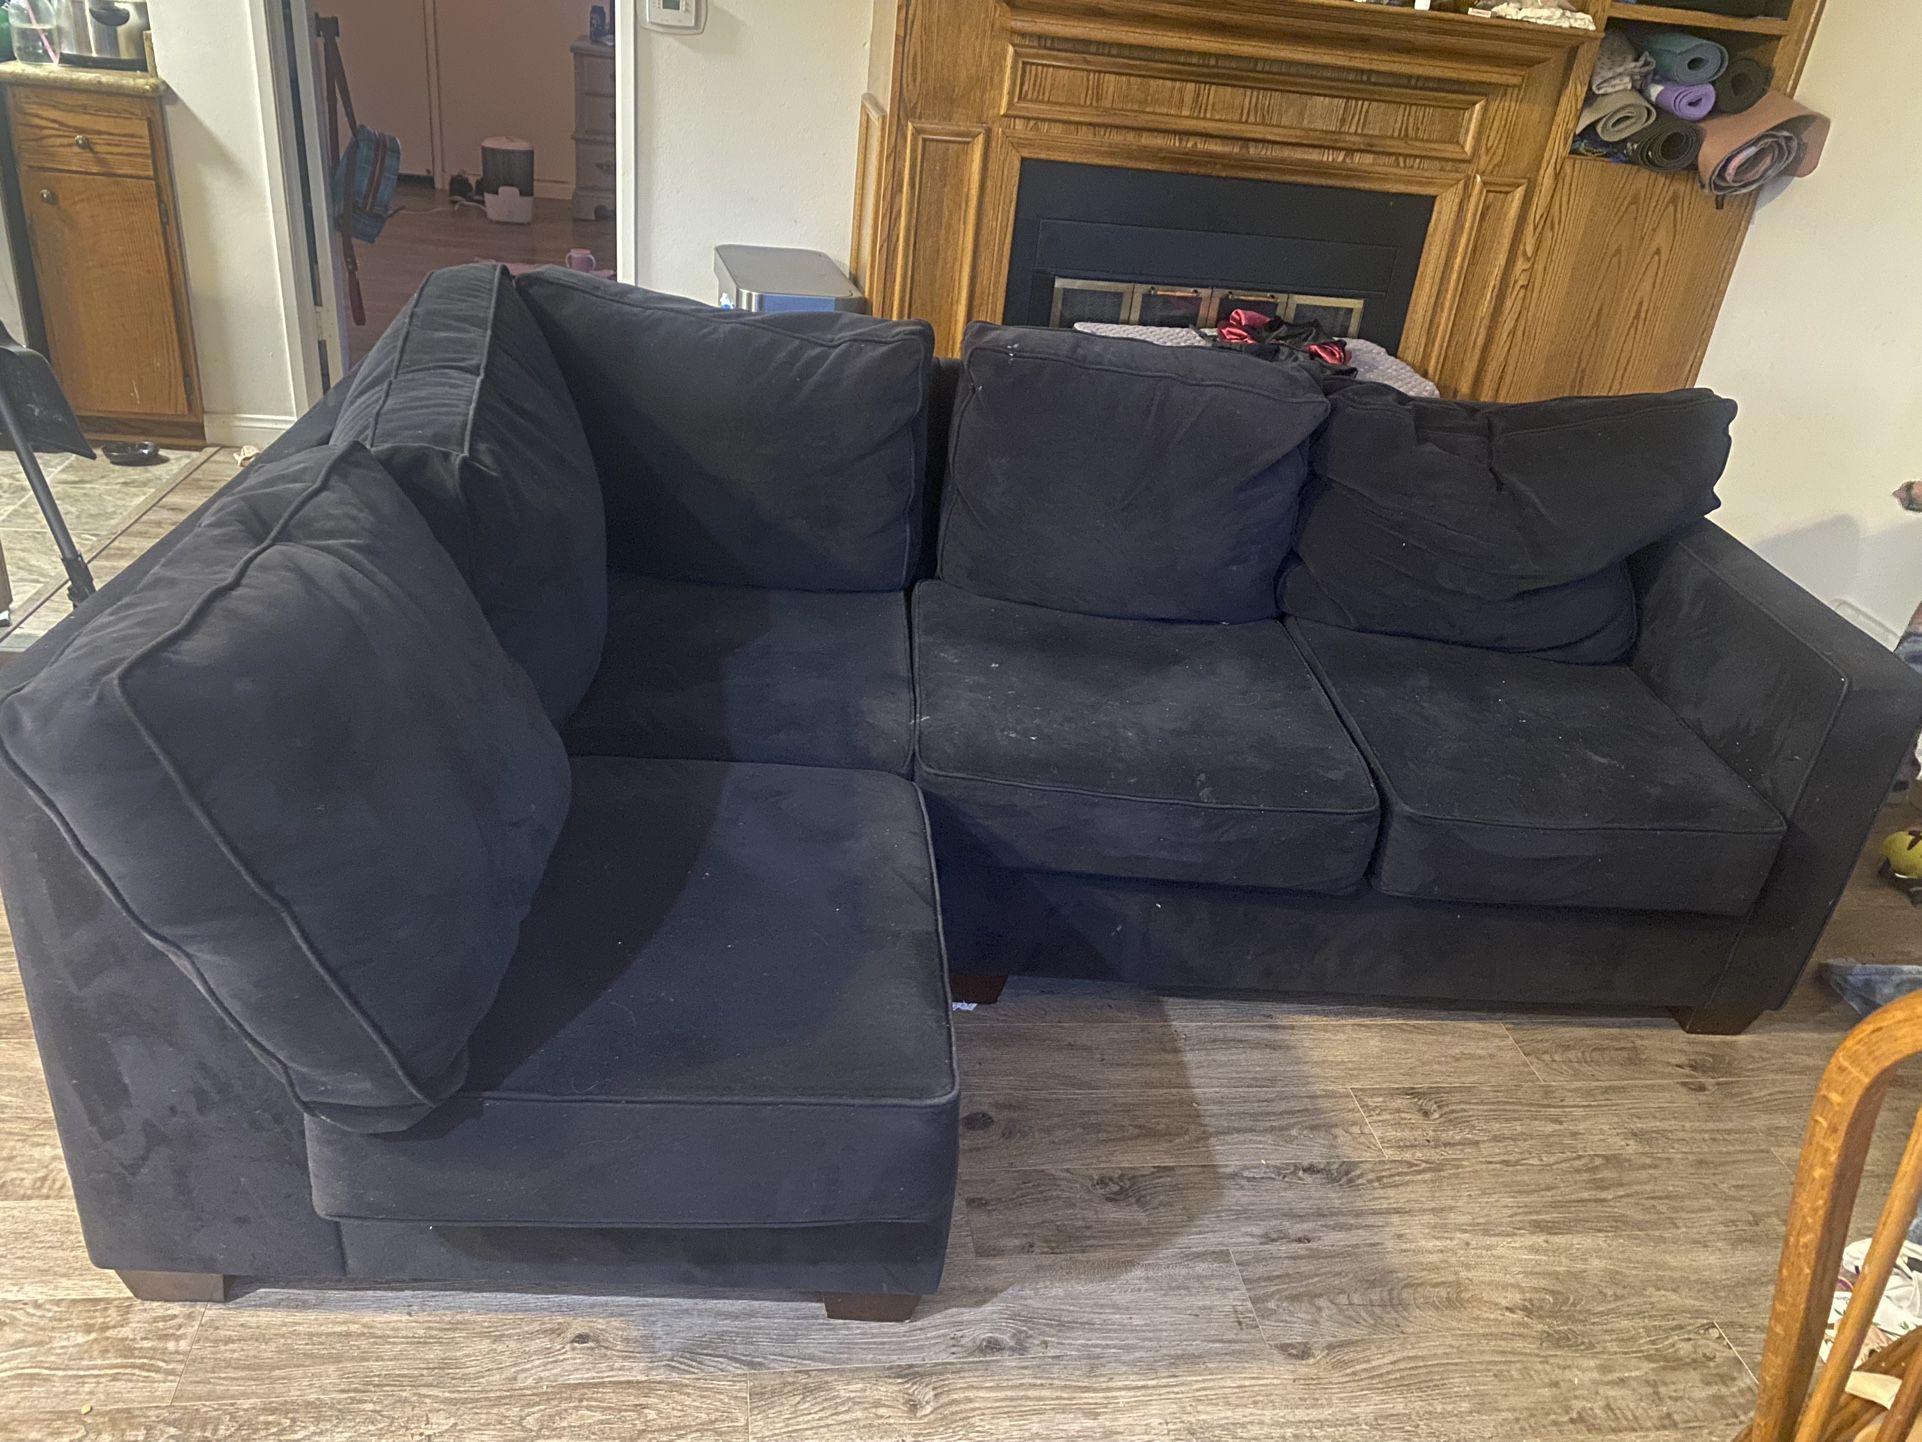 FREE sectional couch